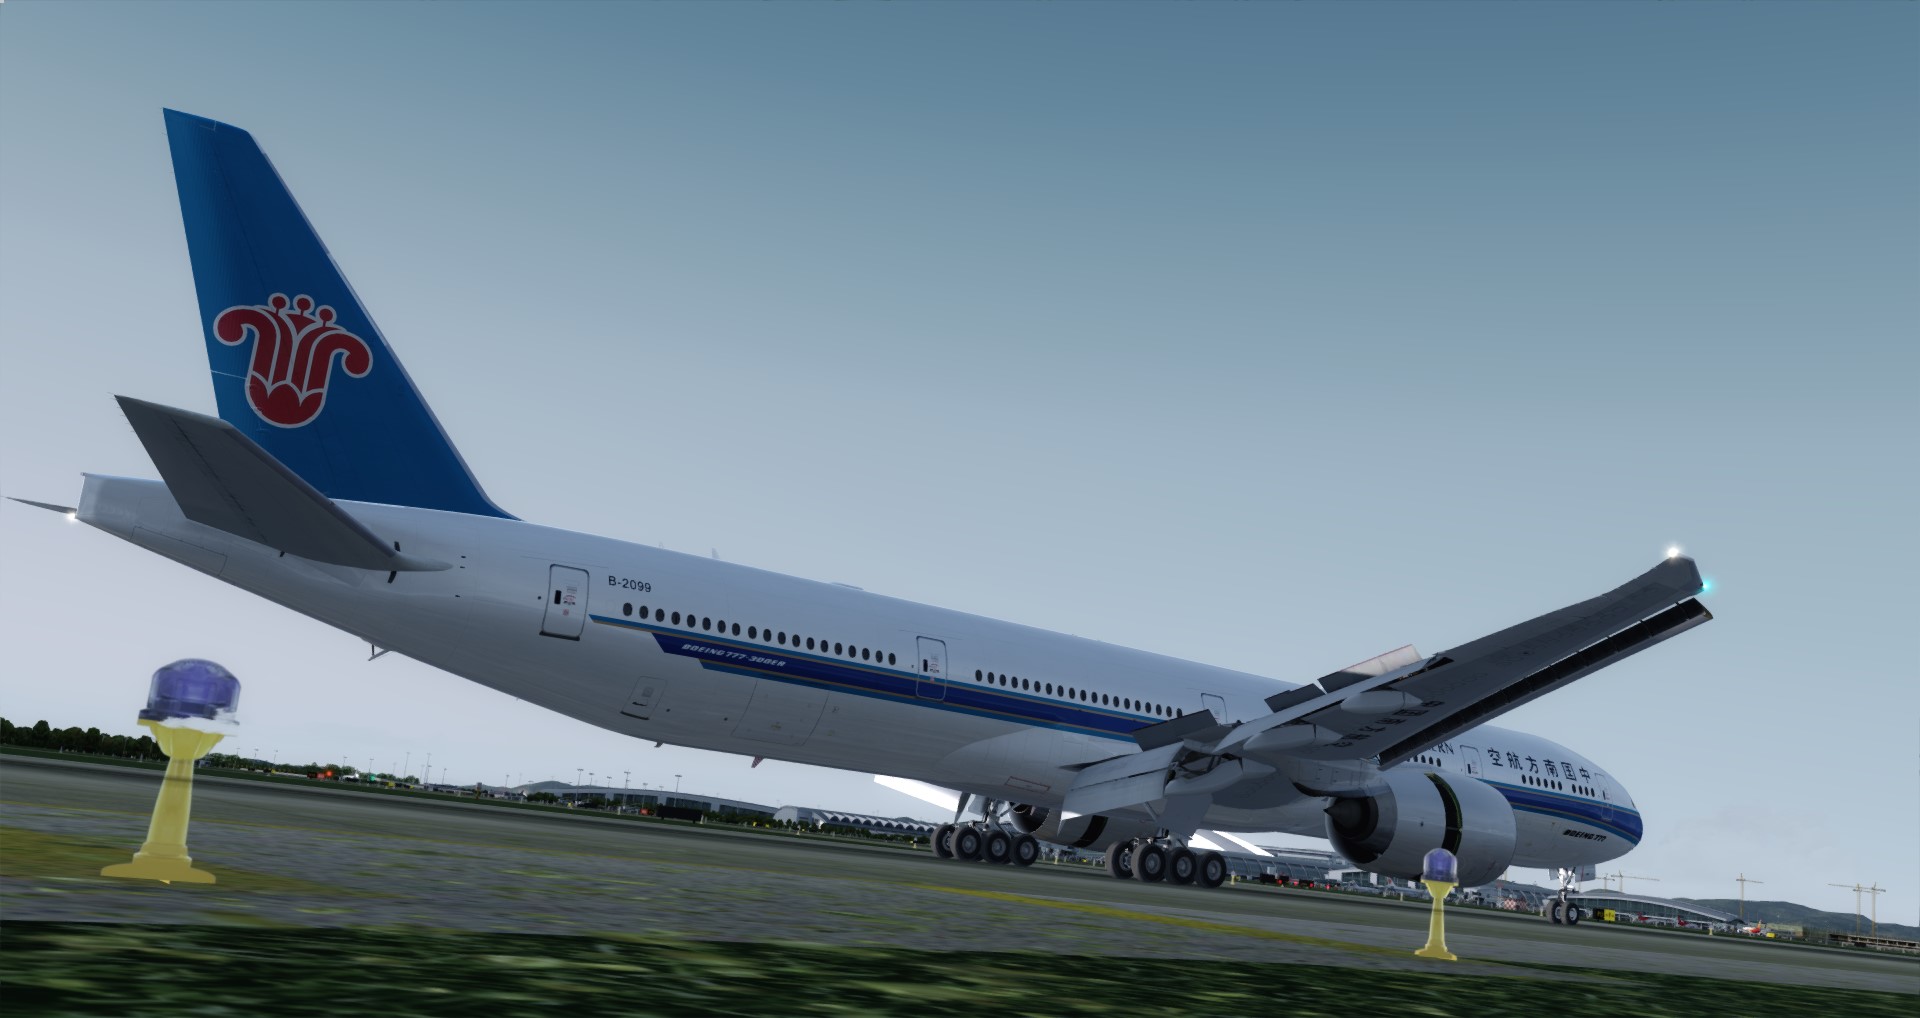 P3D V4 77W China Southern Airlines WADD-ZGGG 营救同胞-4382 